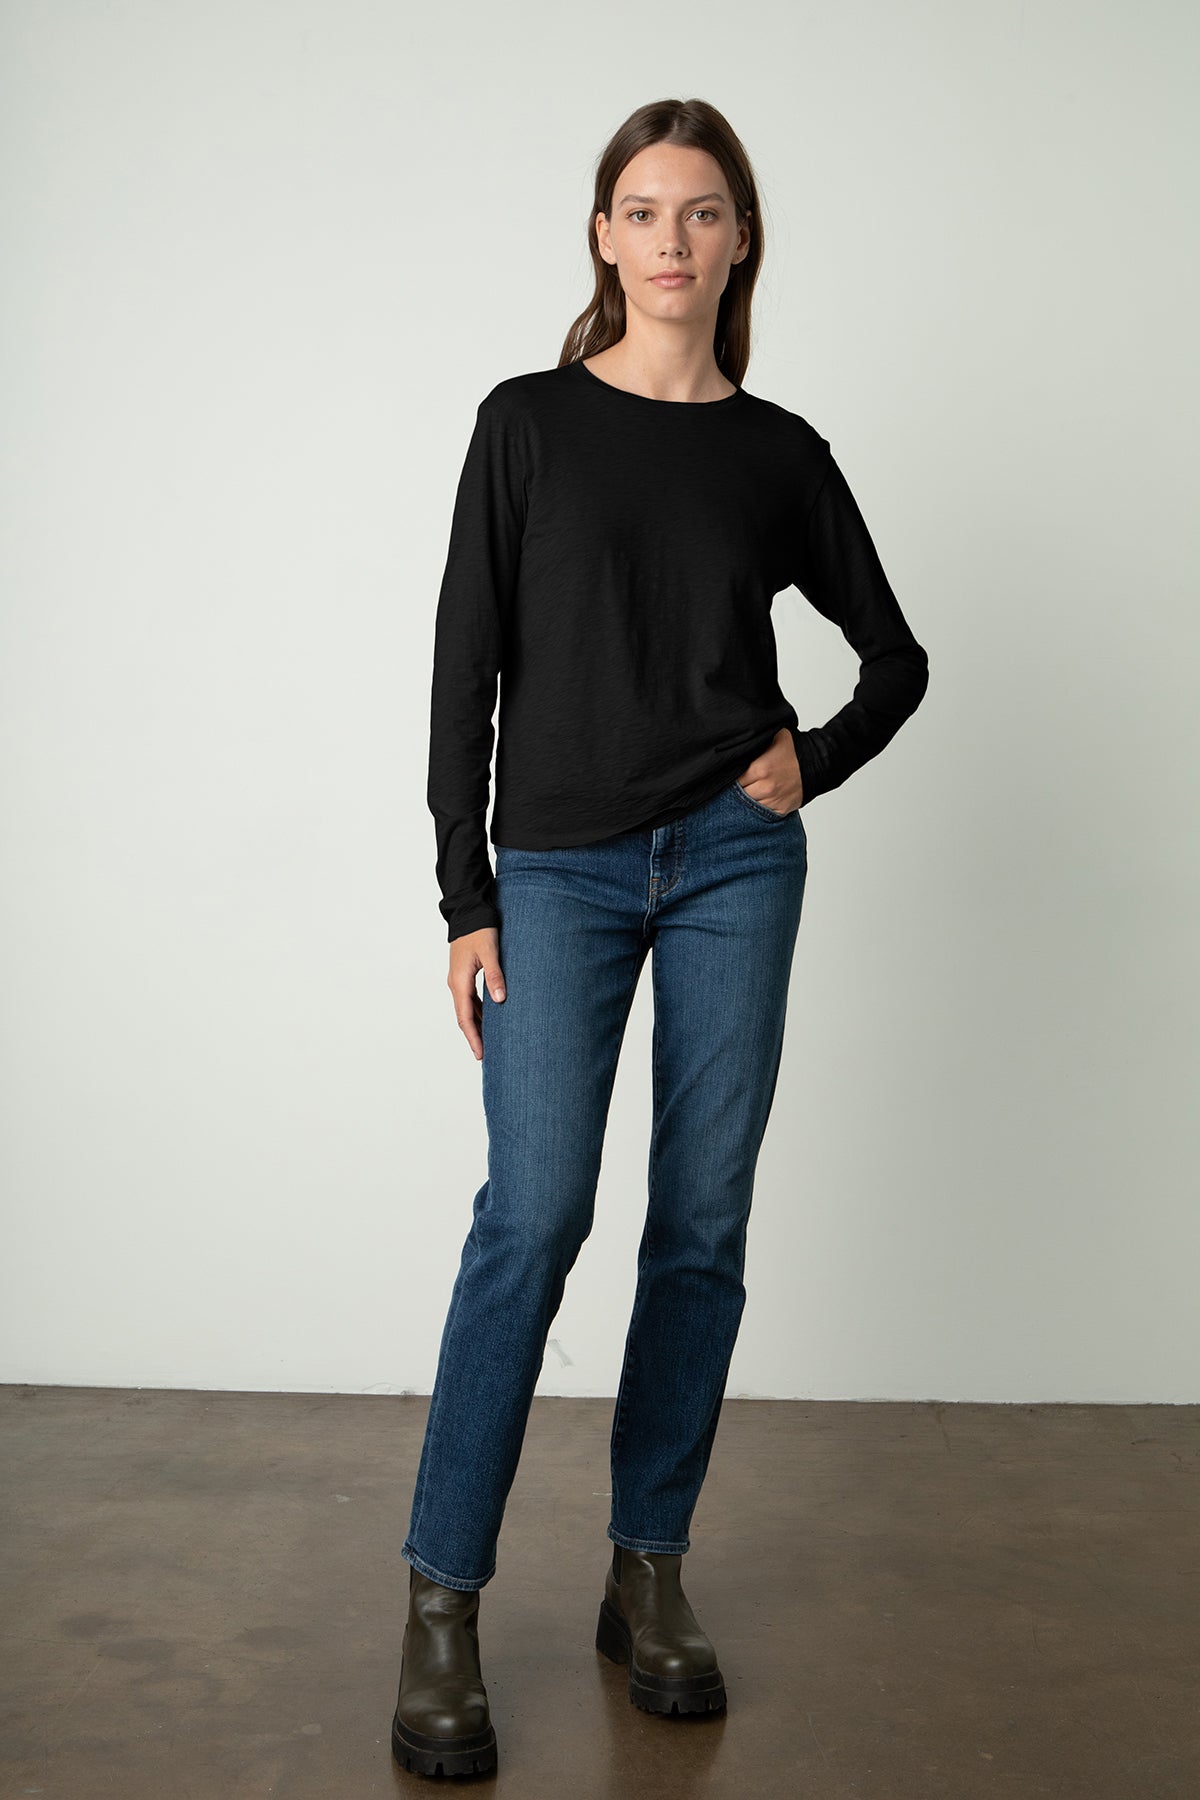   the model is wearing a black HESTER CREW NECK TEE and jeans from Velvet by Graham & Spencer. 